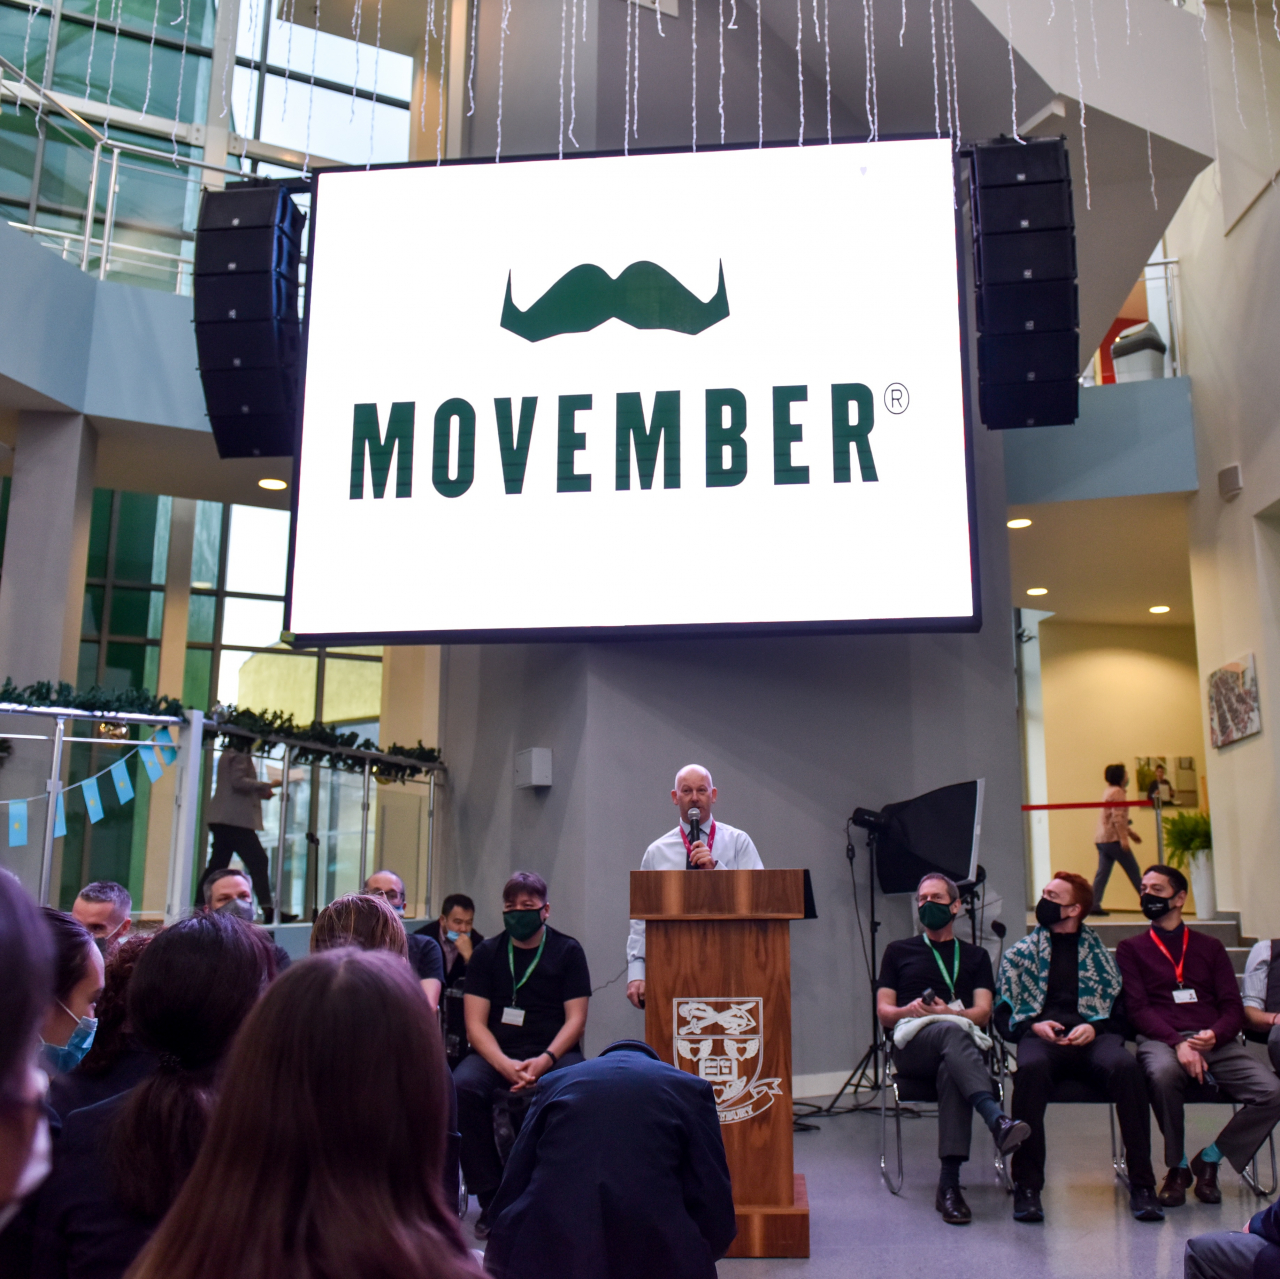 Annual Movember campaign raised over $700 for men's health charity